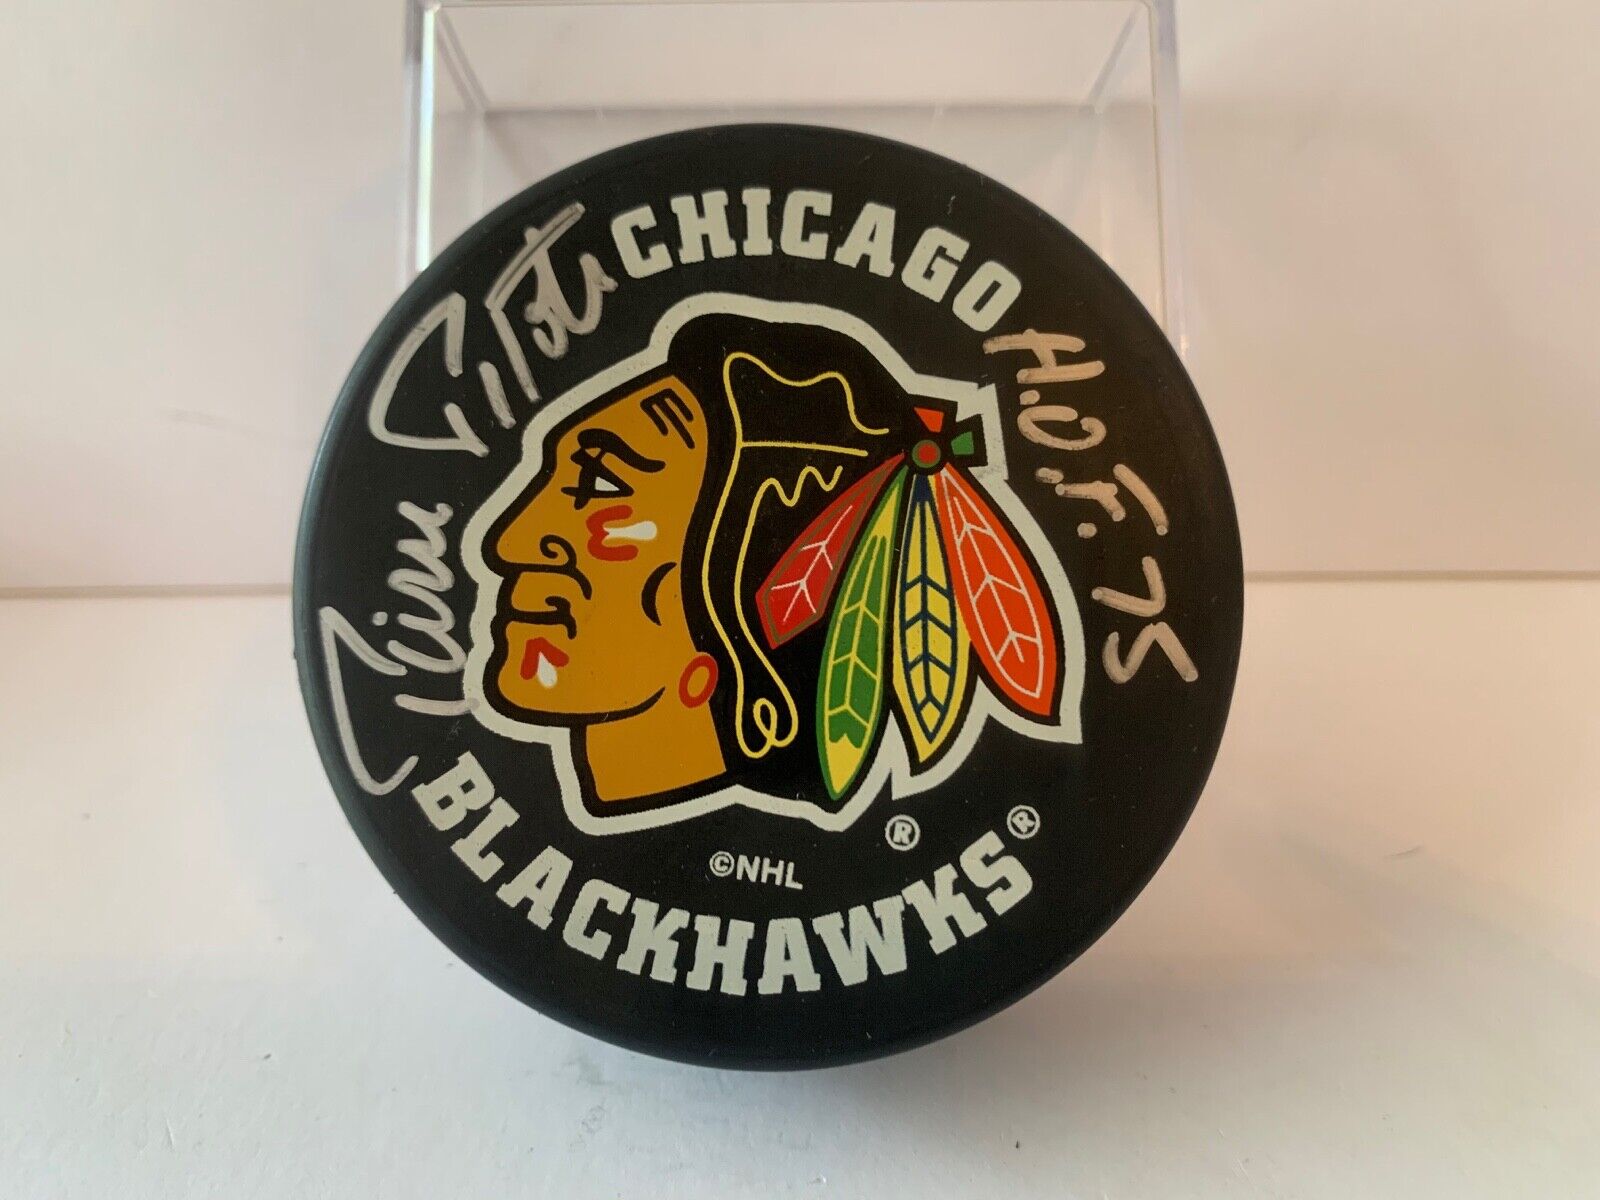 Pierre Pilote Autographed Official NHL Hockey Puck with Chicago Blackhawks Logo